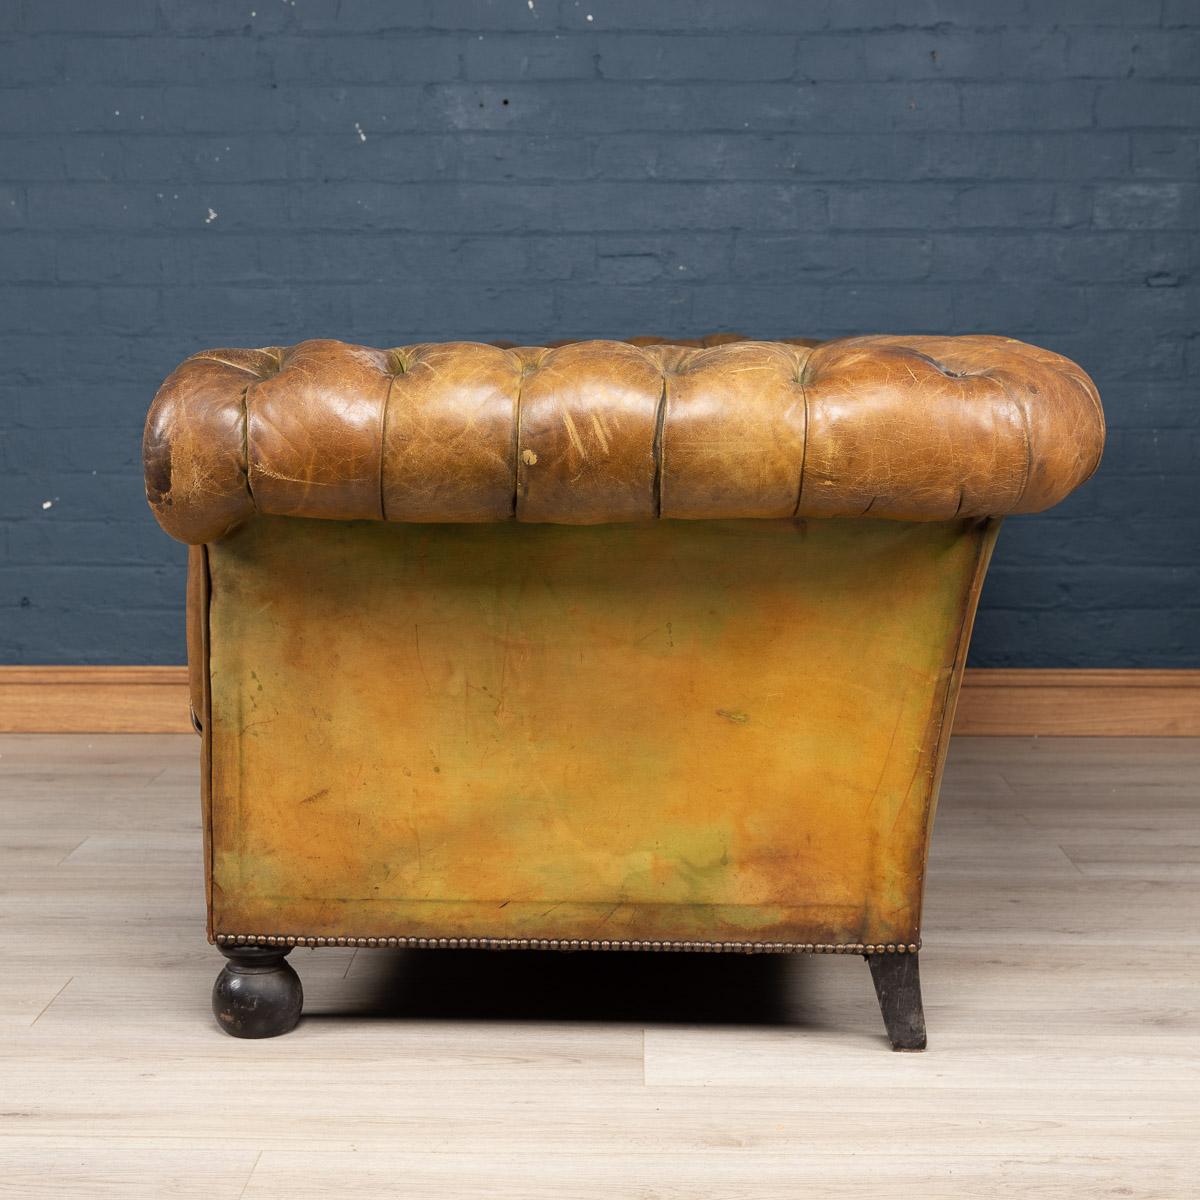 Antique early-20th century superb leather Chesterfield sofa, hand dyed. One of the most elegant models with button down seating, this is a fashionable evergreen capable of uplifting the interior space of any contemporary or traditional home, the